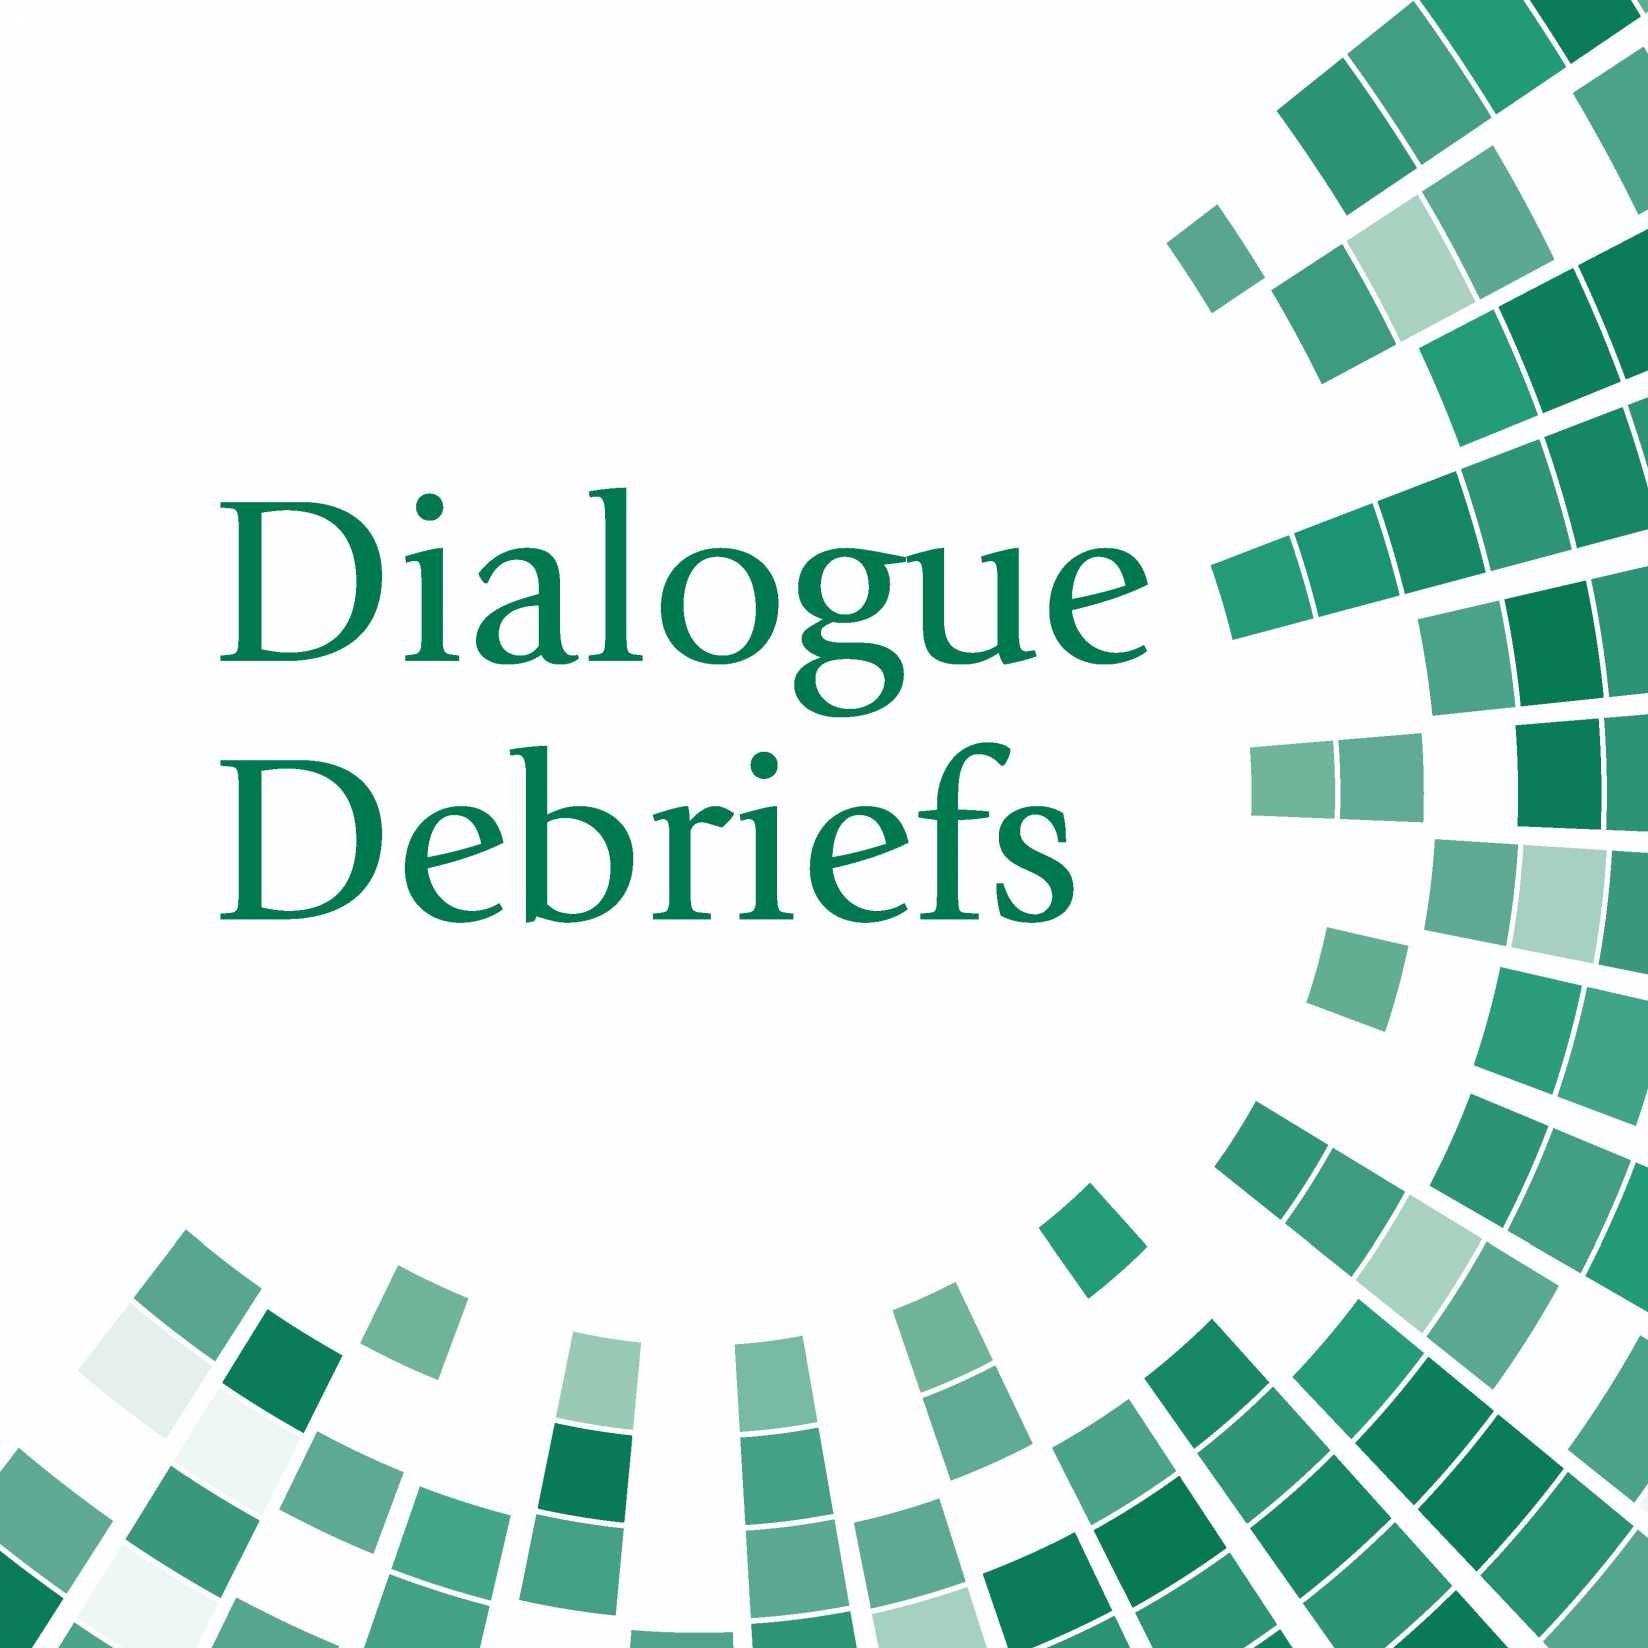 First Meeting of the Catholic - Jewish Modern Orthodox Religious Dialogue